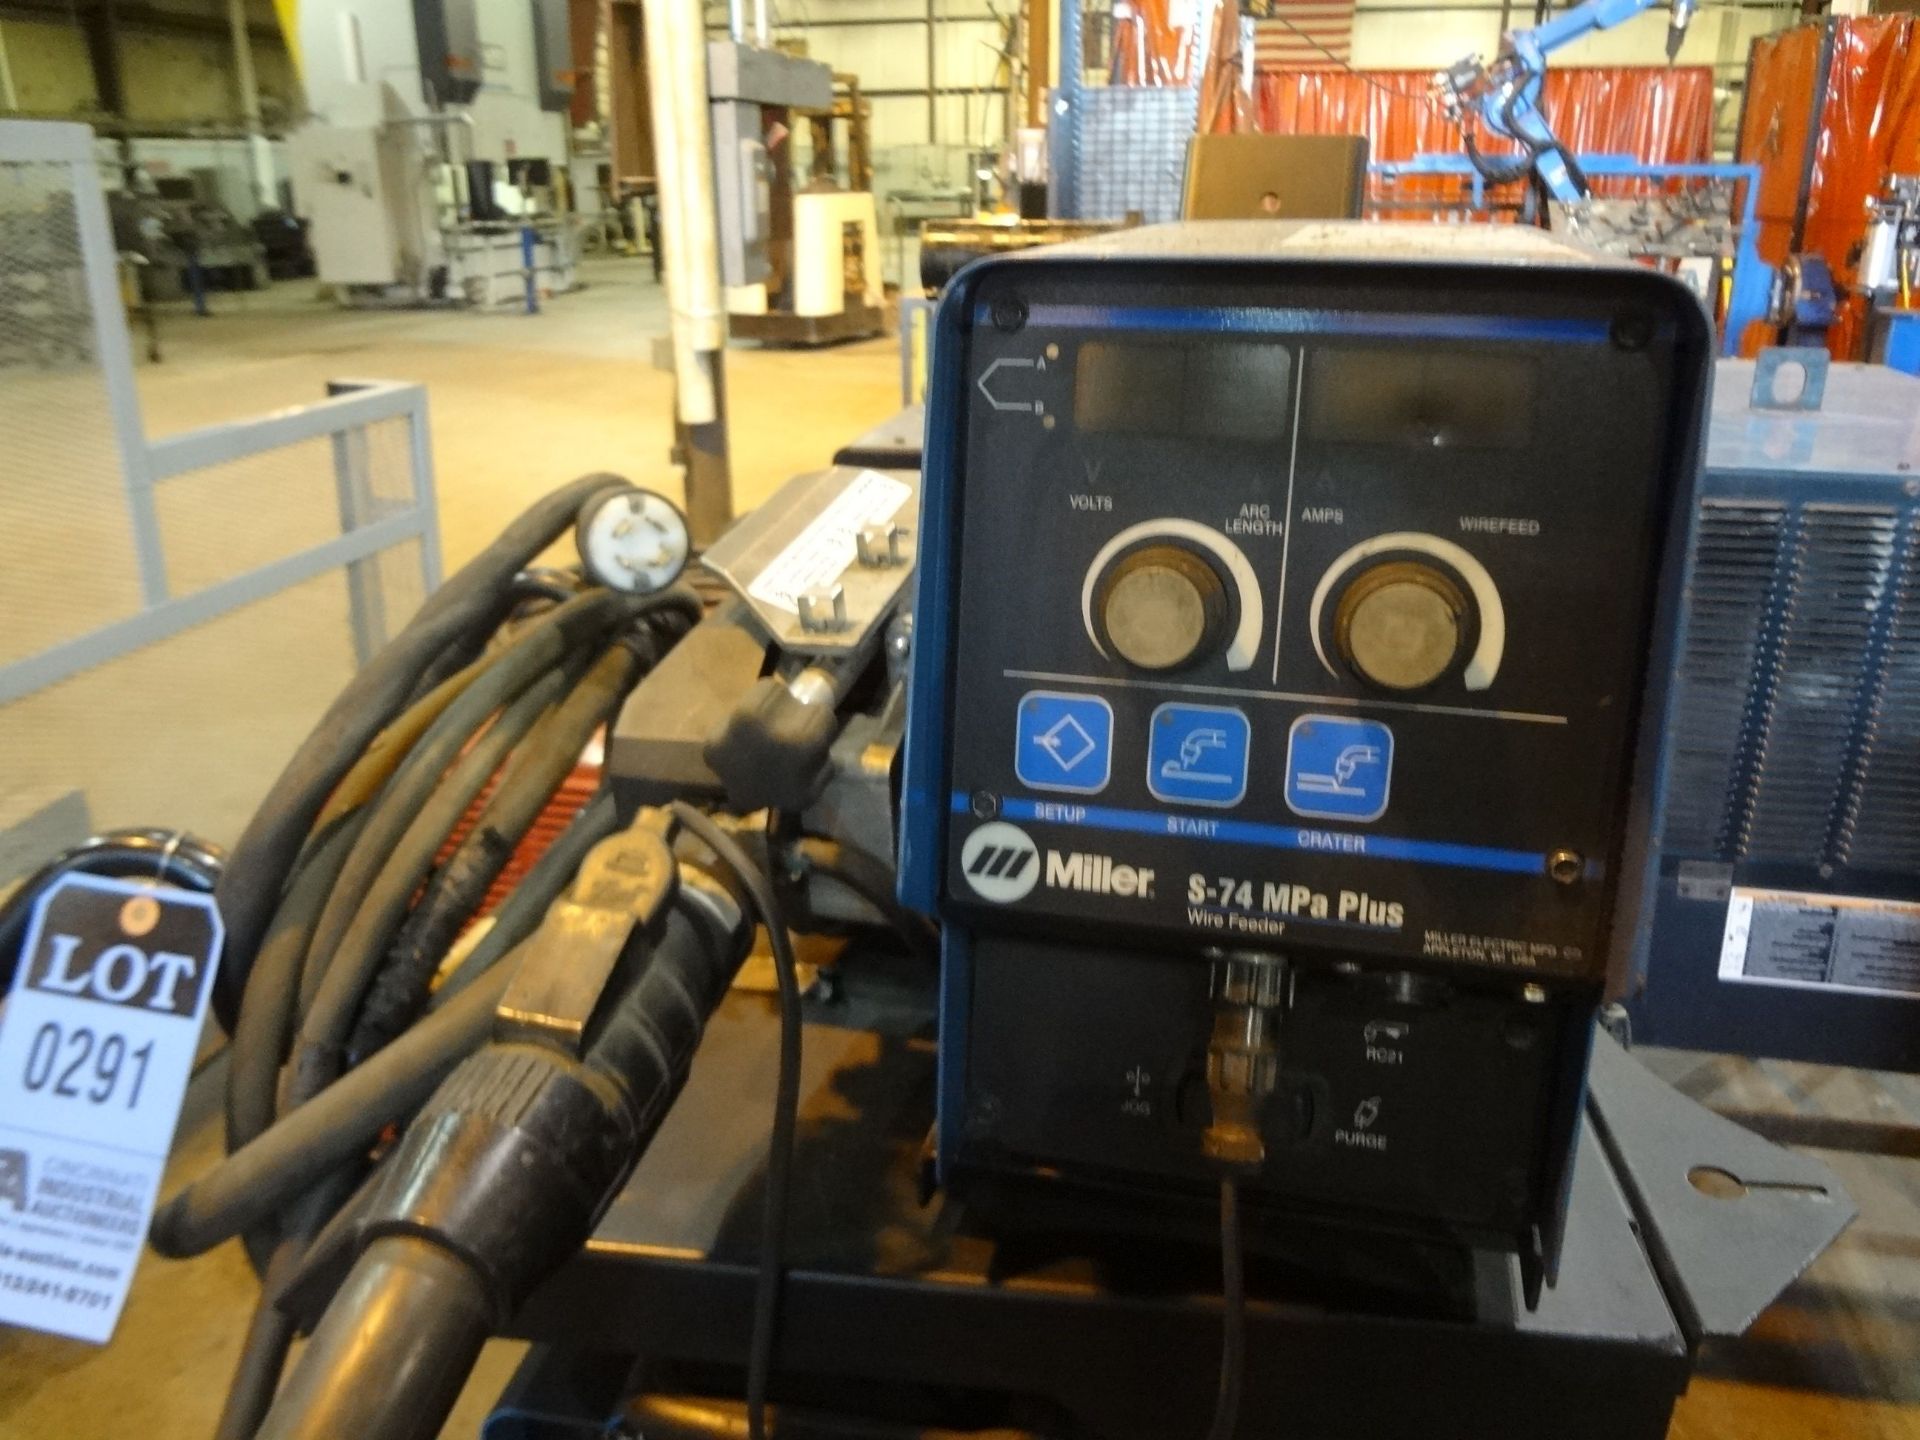 350 AMP MILLER INVISION 352 MPA AUTOLINE WELDER; S/N MD300146U, W/ MILLER S-74 MPA PLUS WIRE FEED - Image 3 of 3